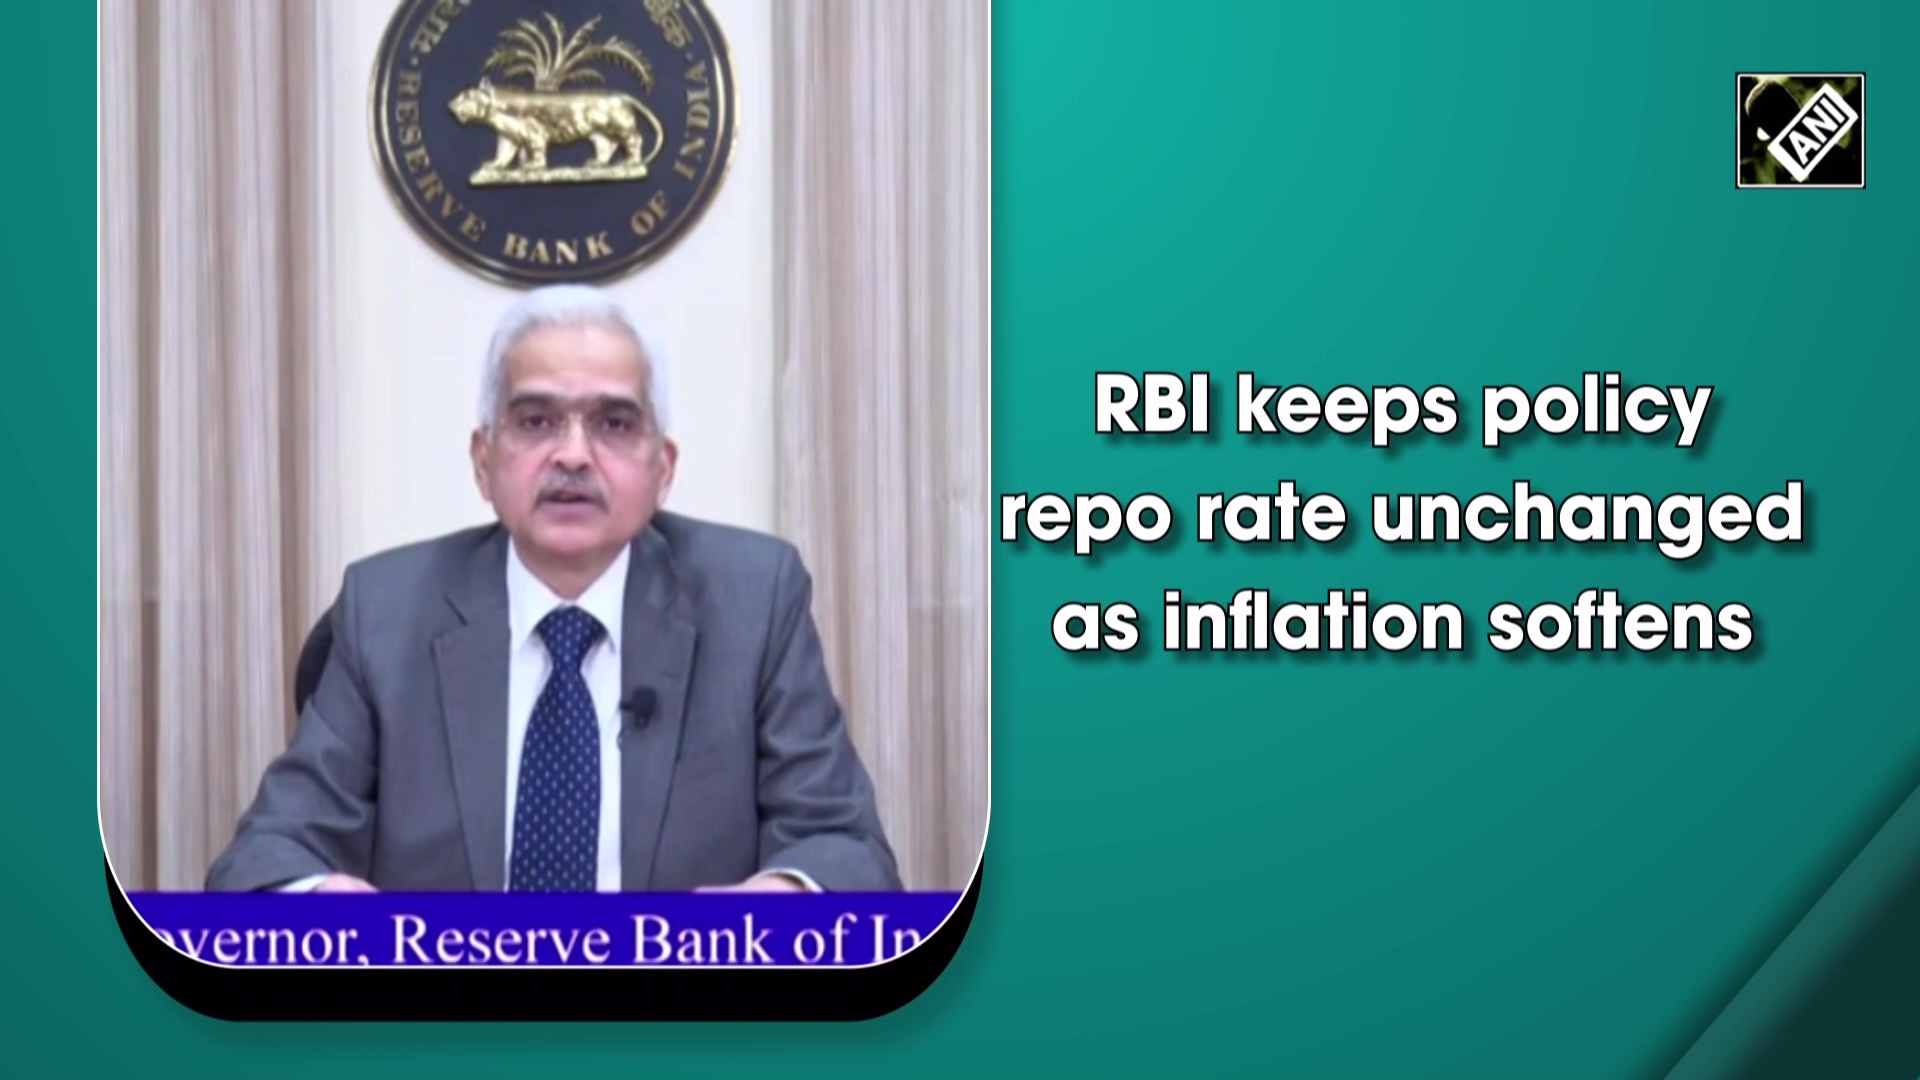 RBI keeps policy repo rate unchanged as inflation softens